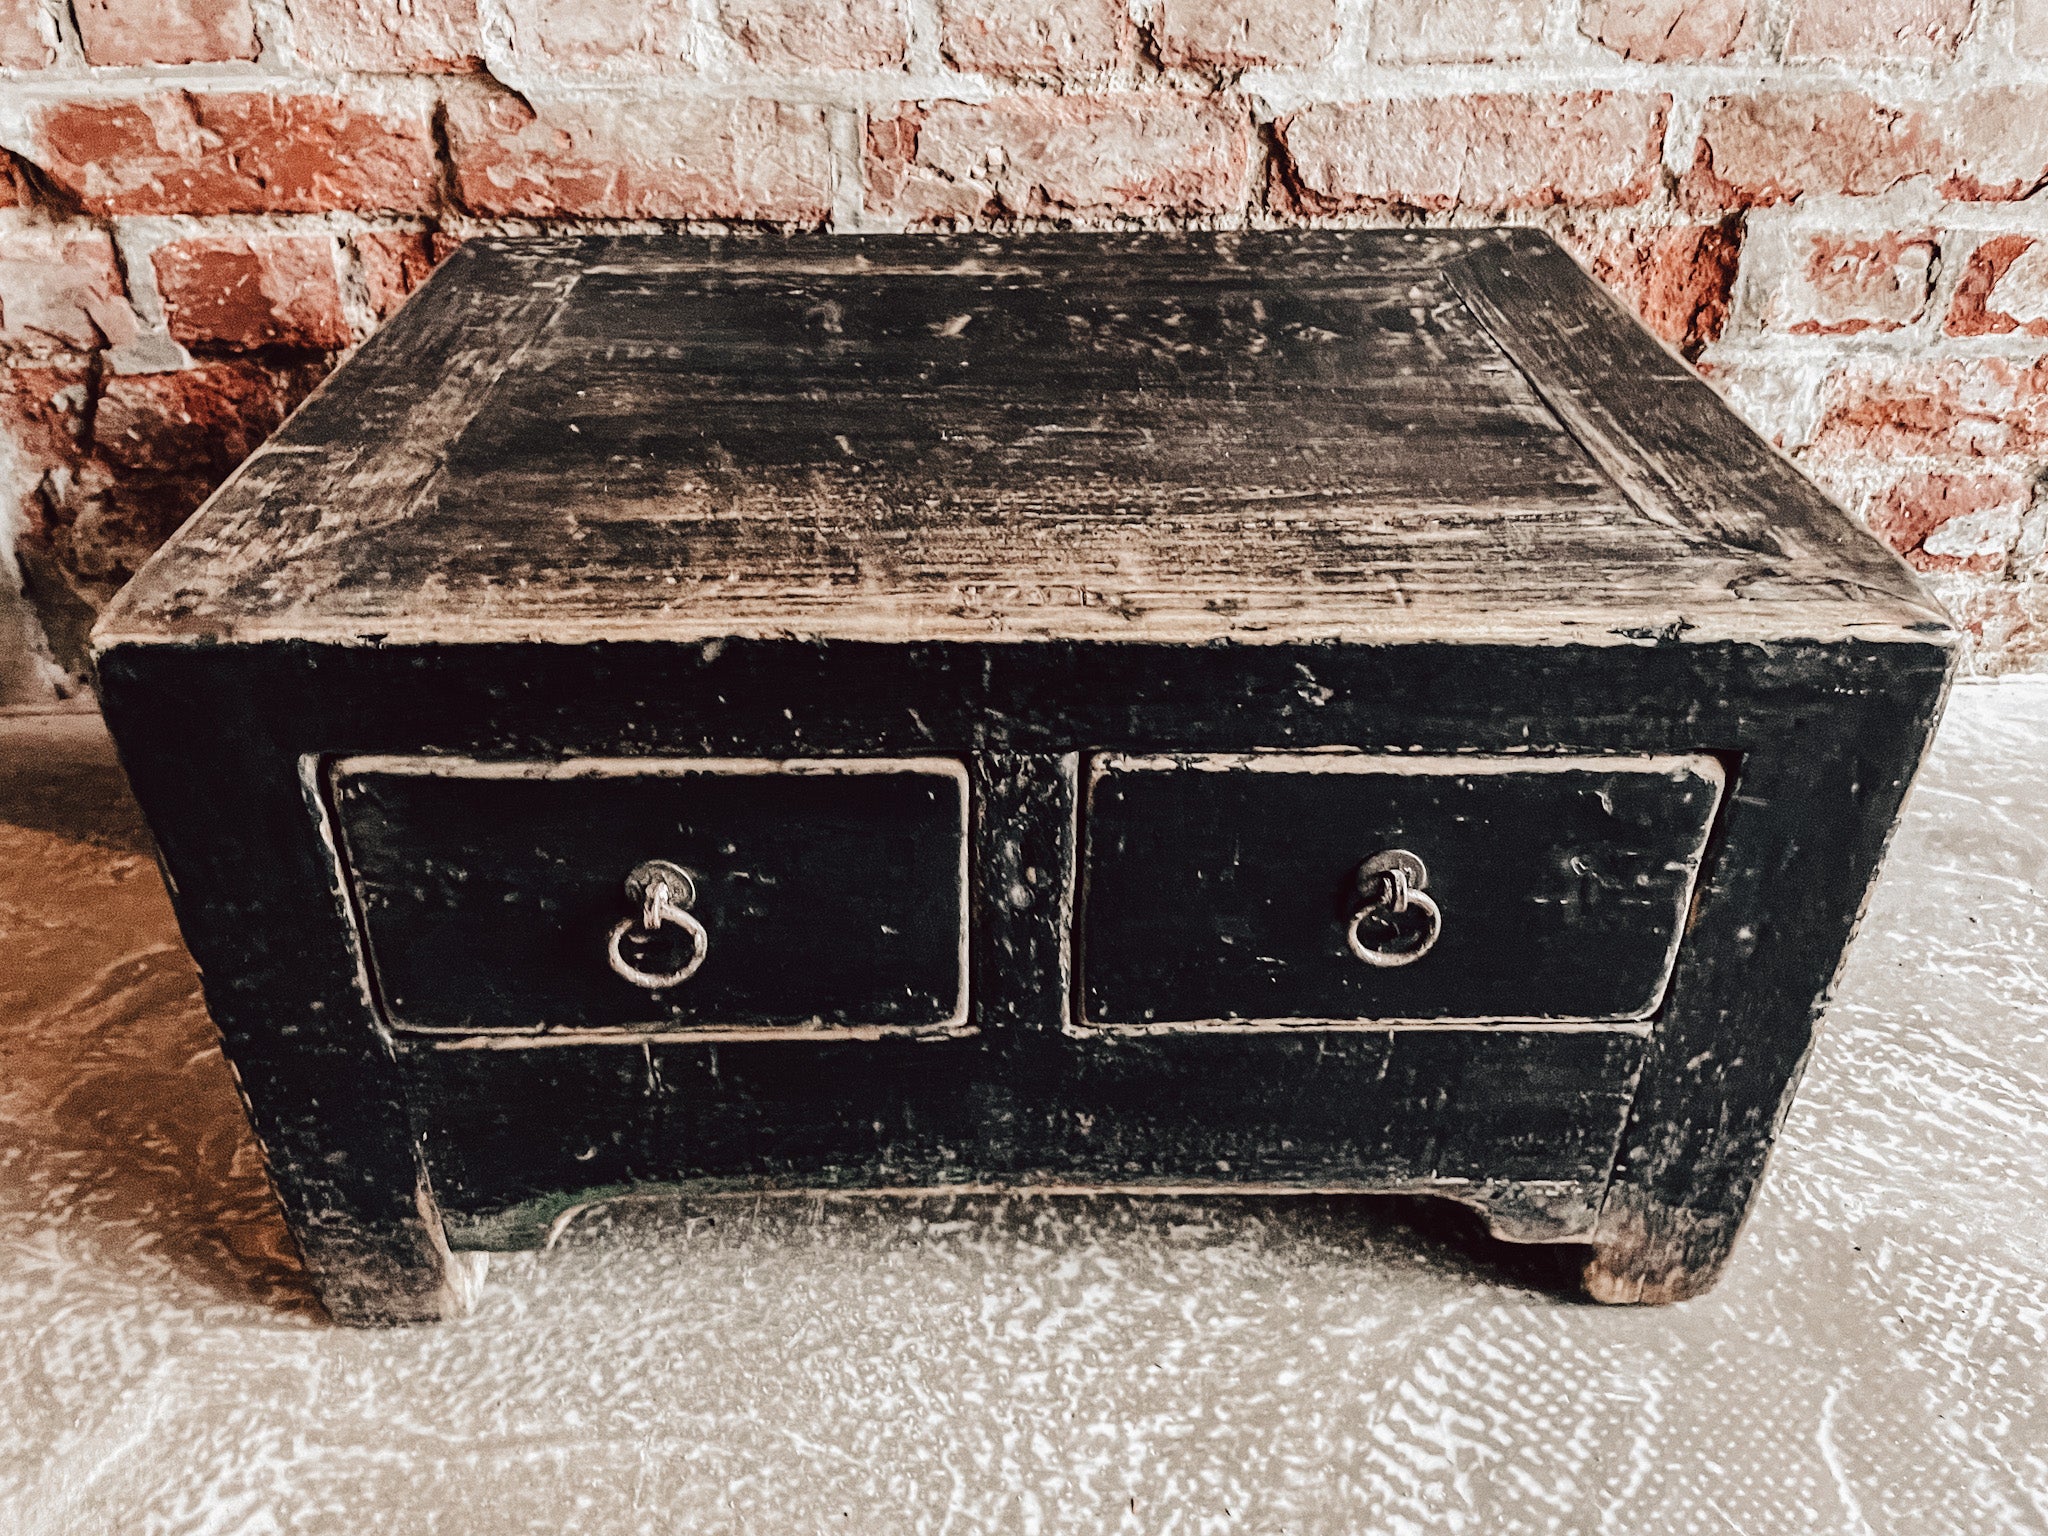 Vintage side table with 2 drawers